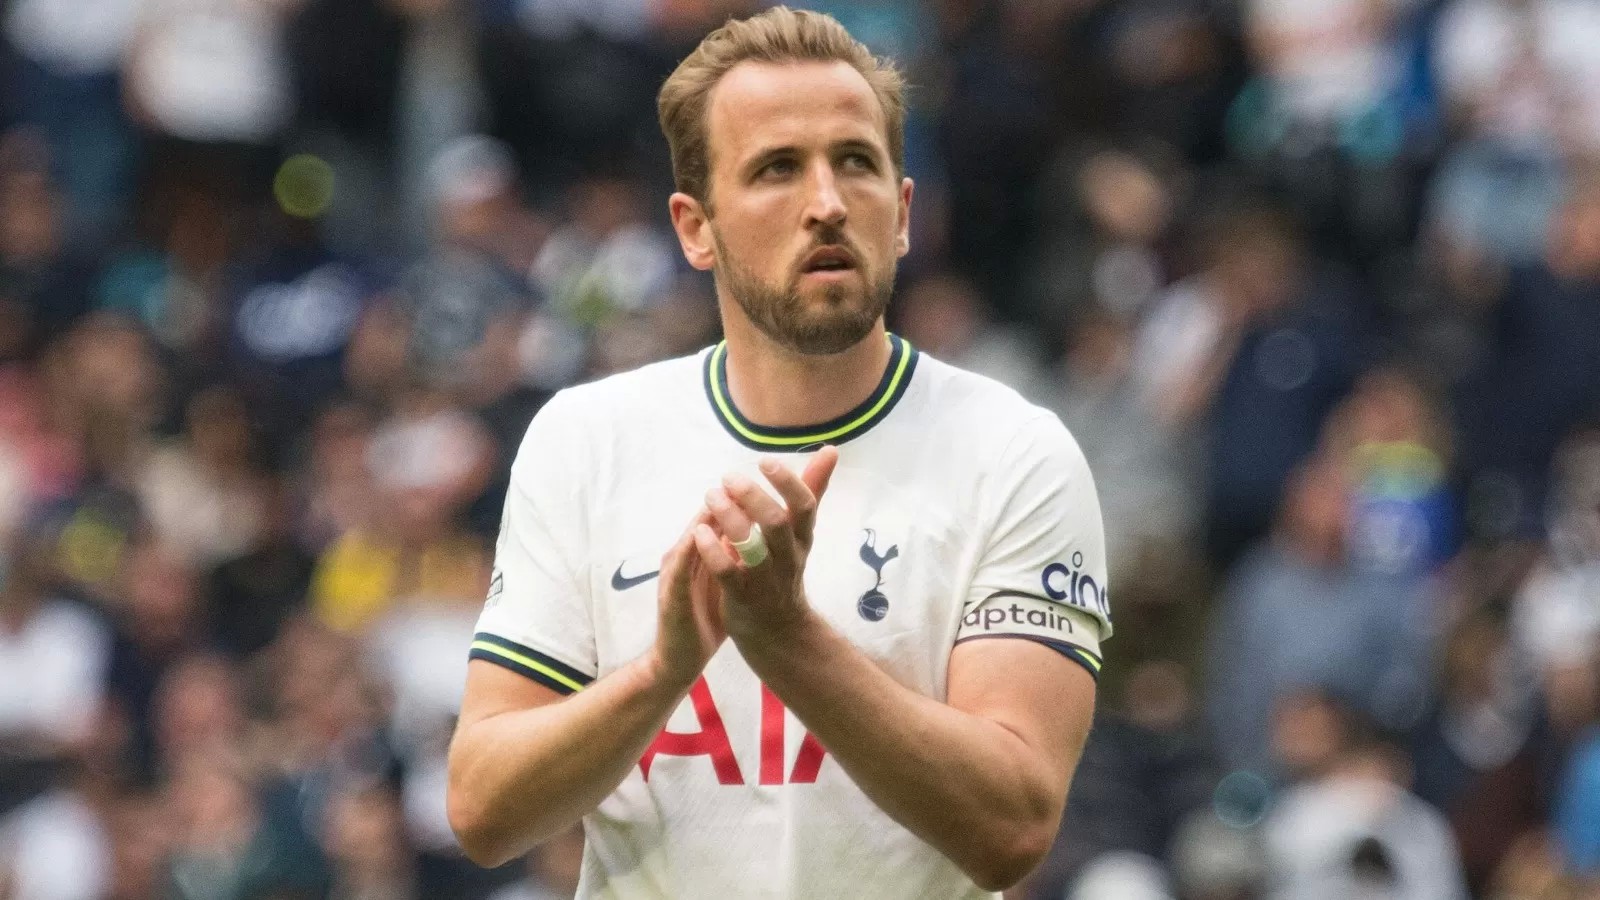 Just say no: Harry Kane should decline Real chance and become the Prem’s greatest…